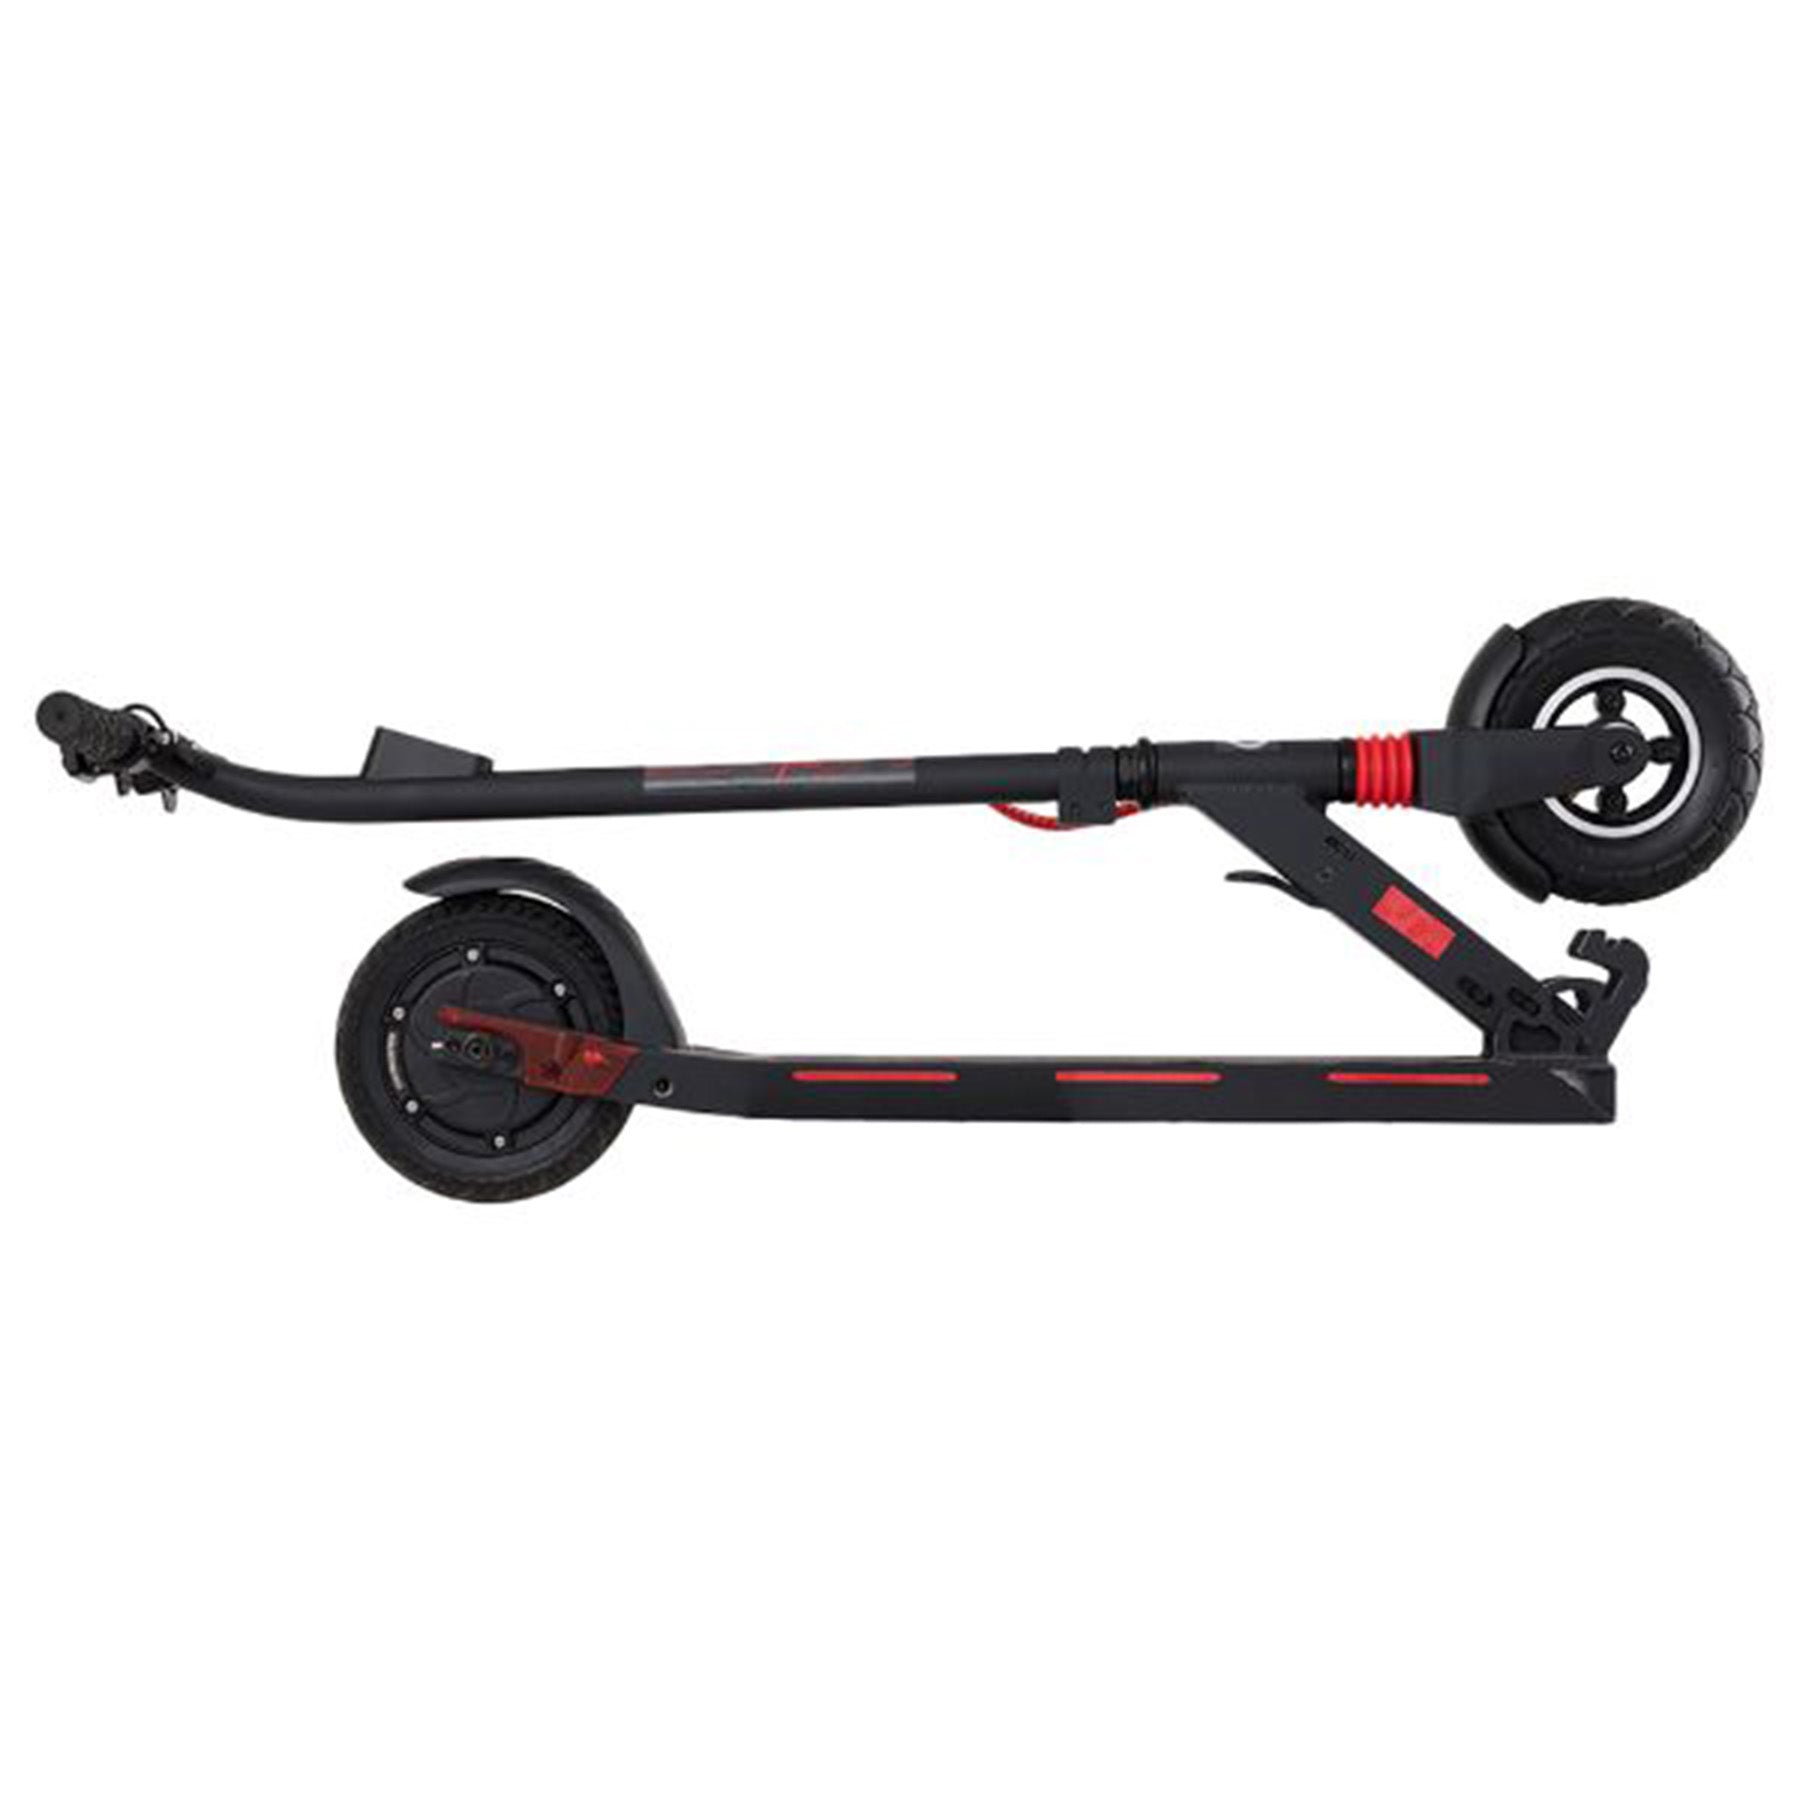 VT5 Lithium Adults Electric Foldable Scooter - Black & Red